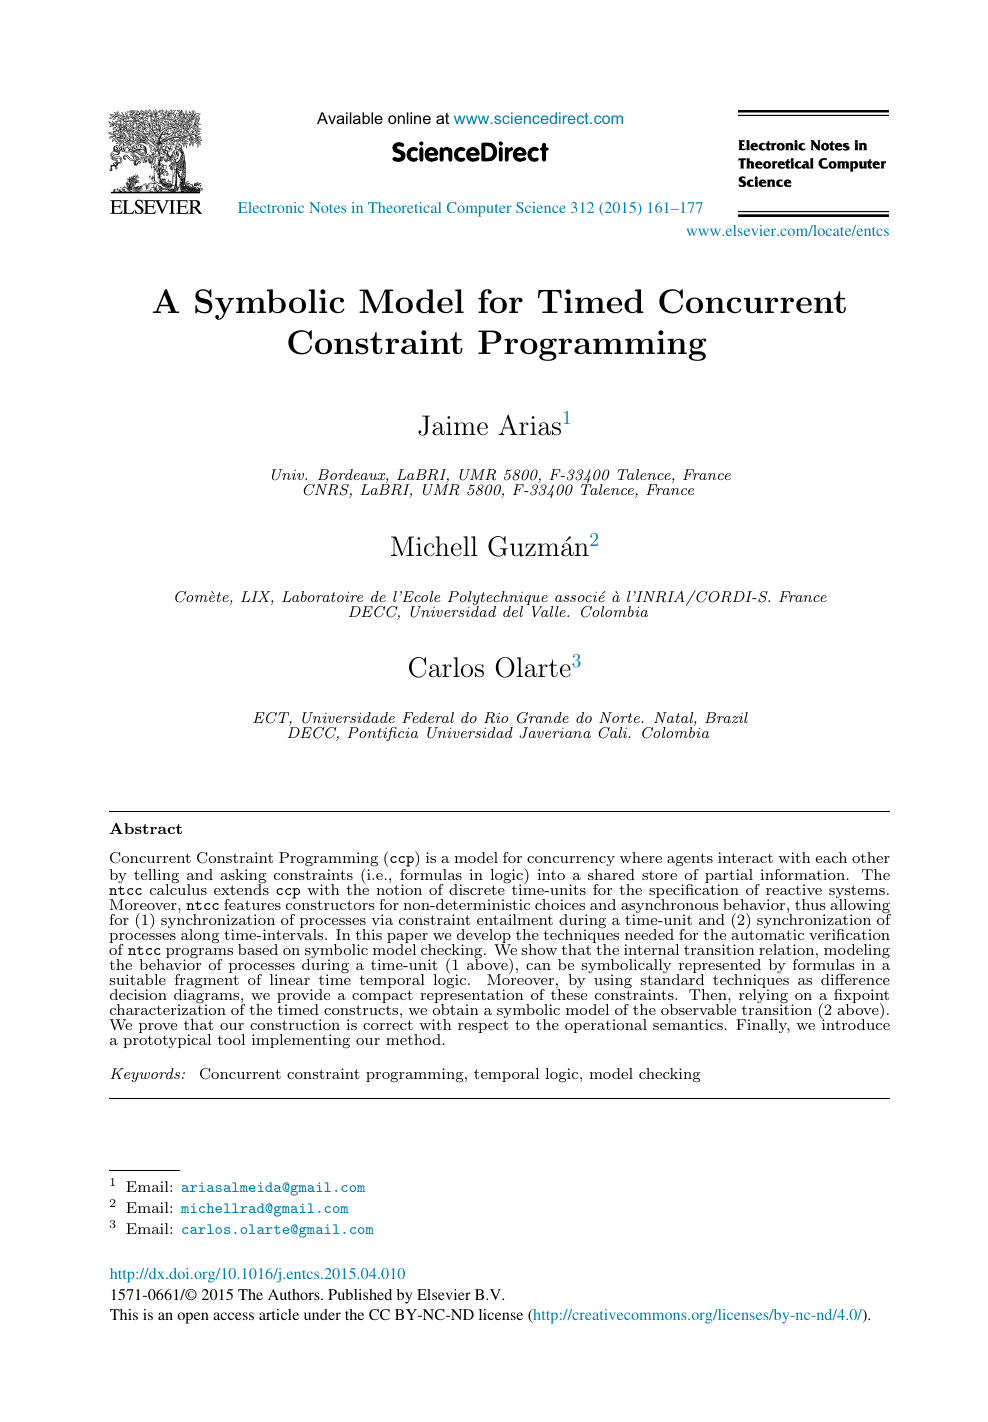 A Symbolic Model For Timed Concurrent Constraint Programming Topic Of Research Paper In Computer And Information Sciences Download Scholarly Article Pdf And Read For Free On Cyberleninka Open Science Hub